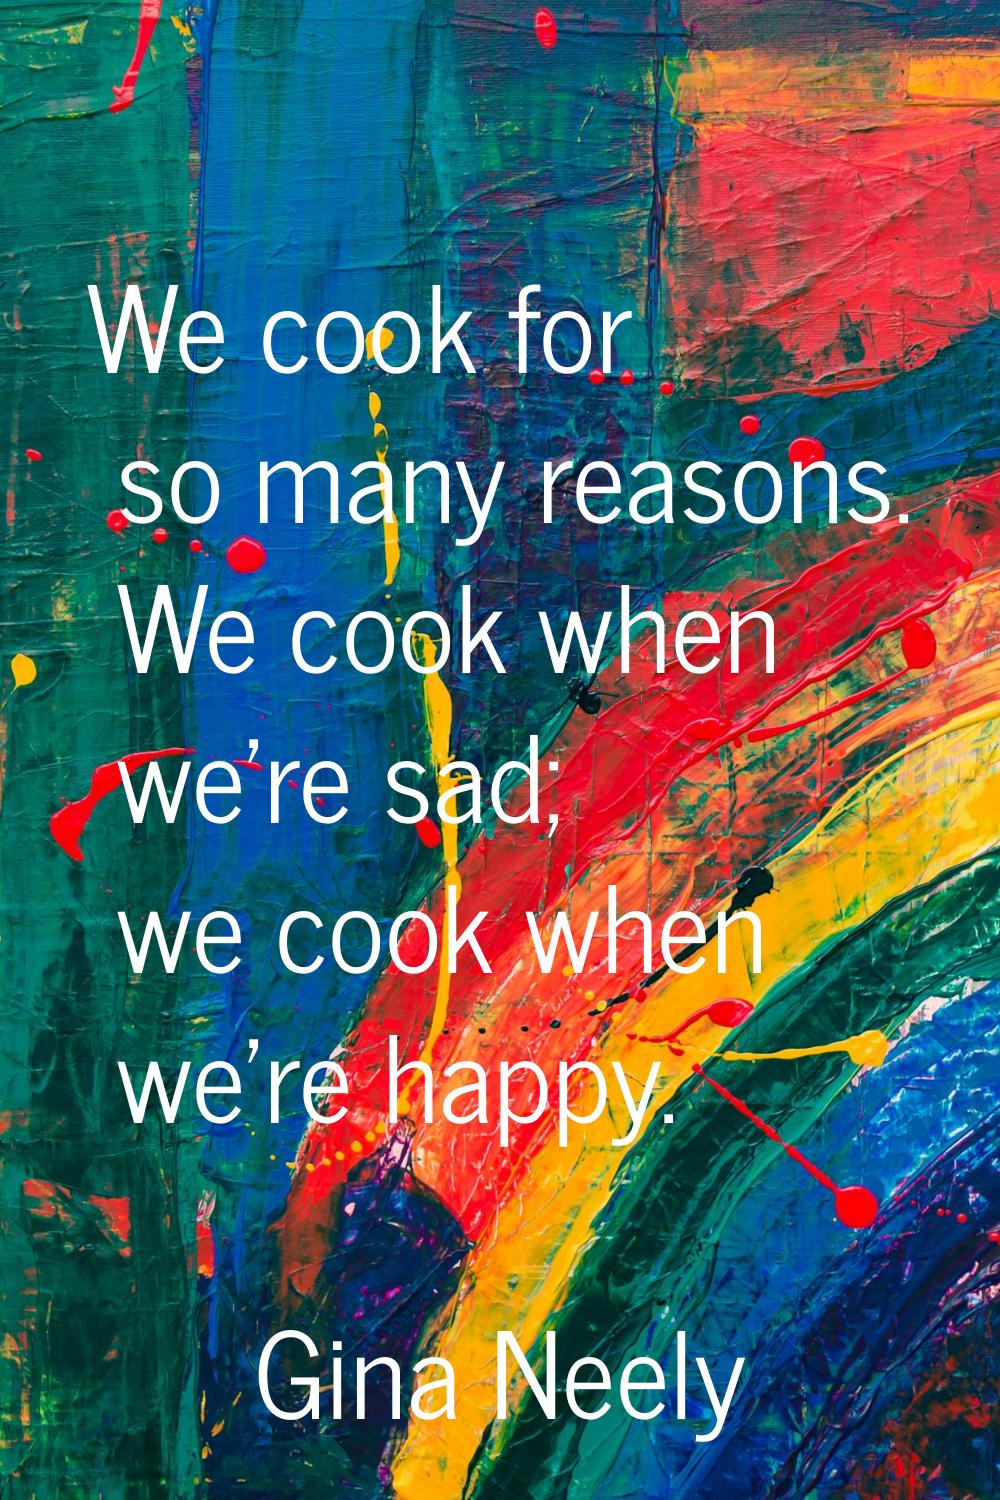 We cook for so many reasons. We cook when we're sad; we cook when we're happy.